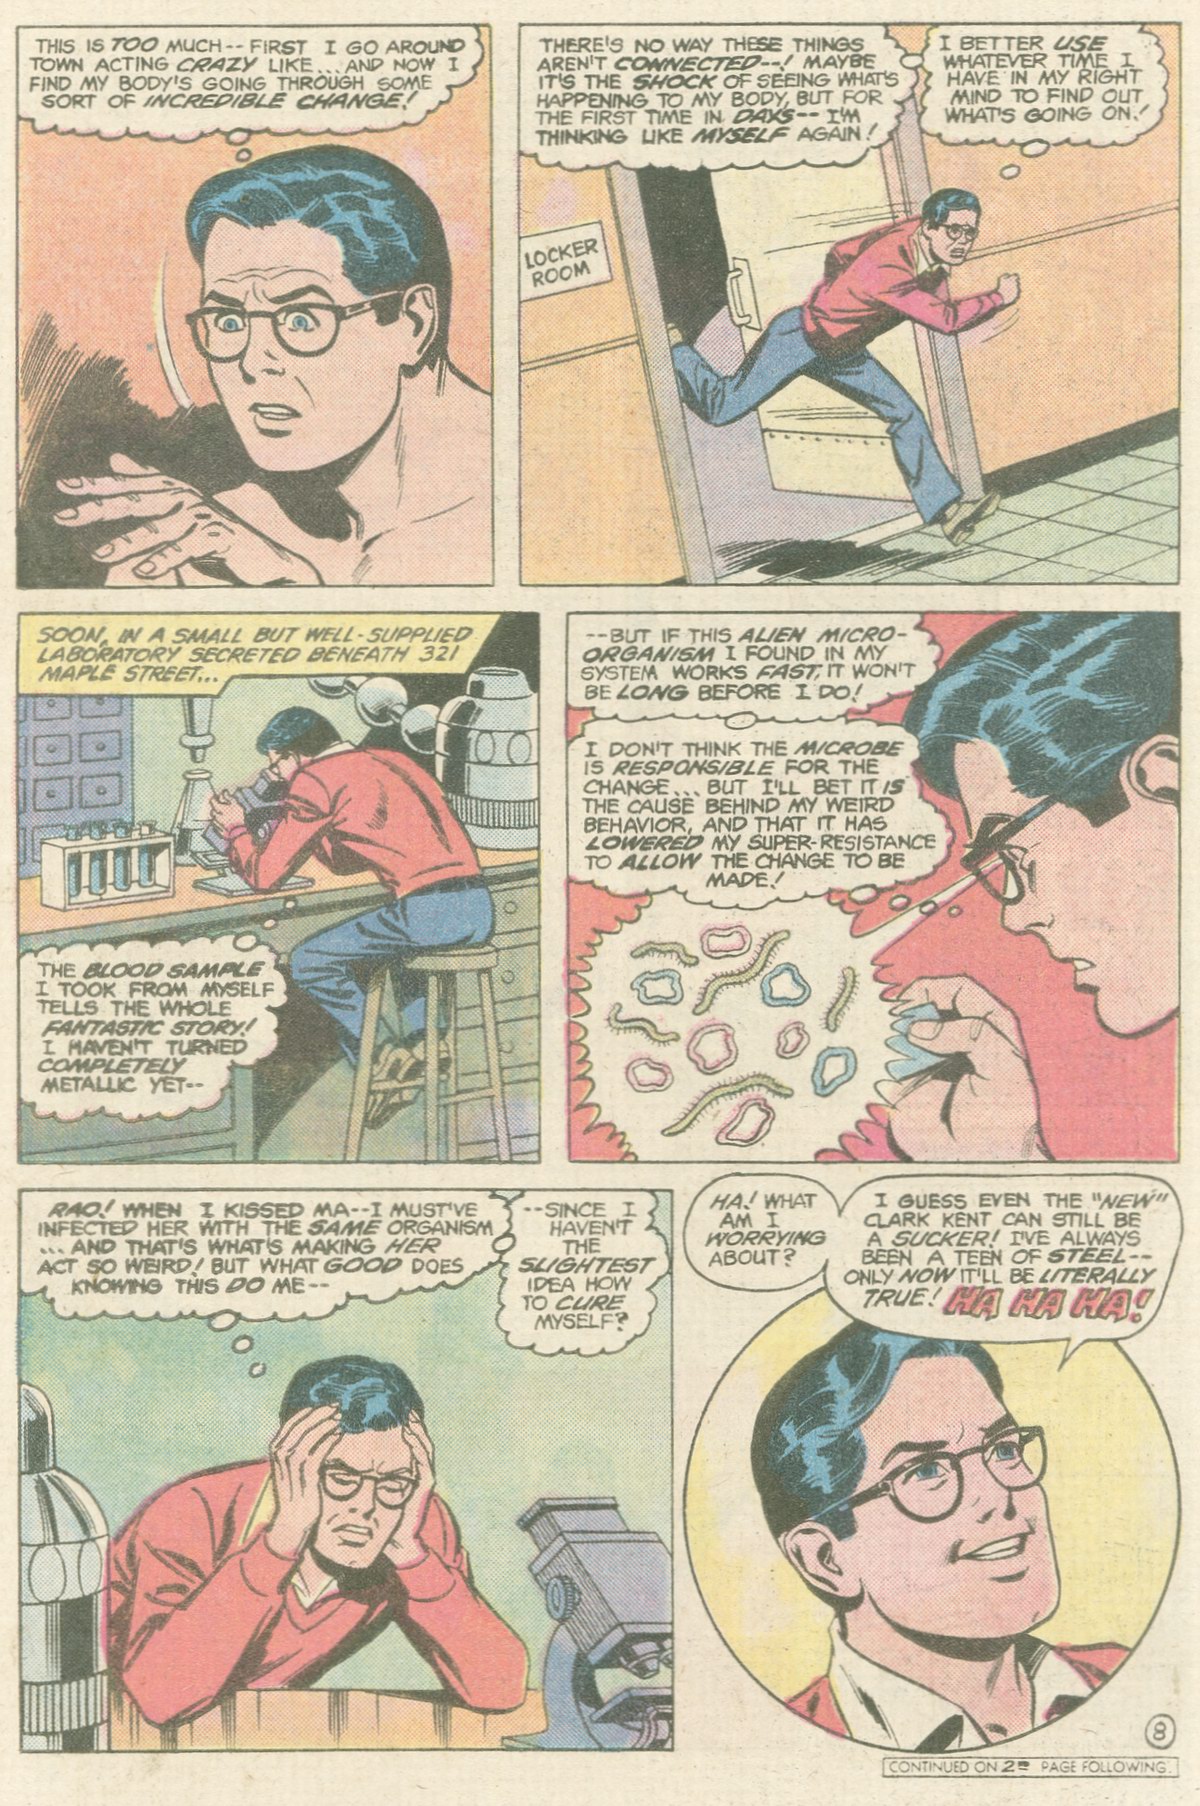 The New Adventures of Superboy 41 Page 8